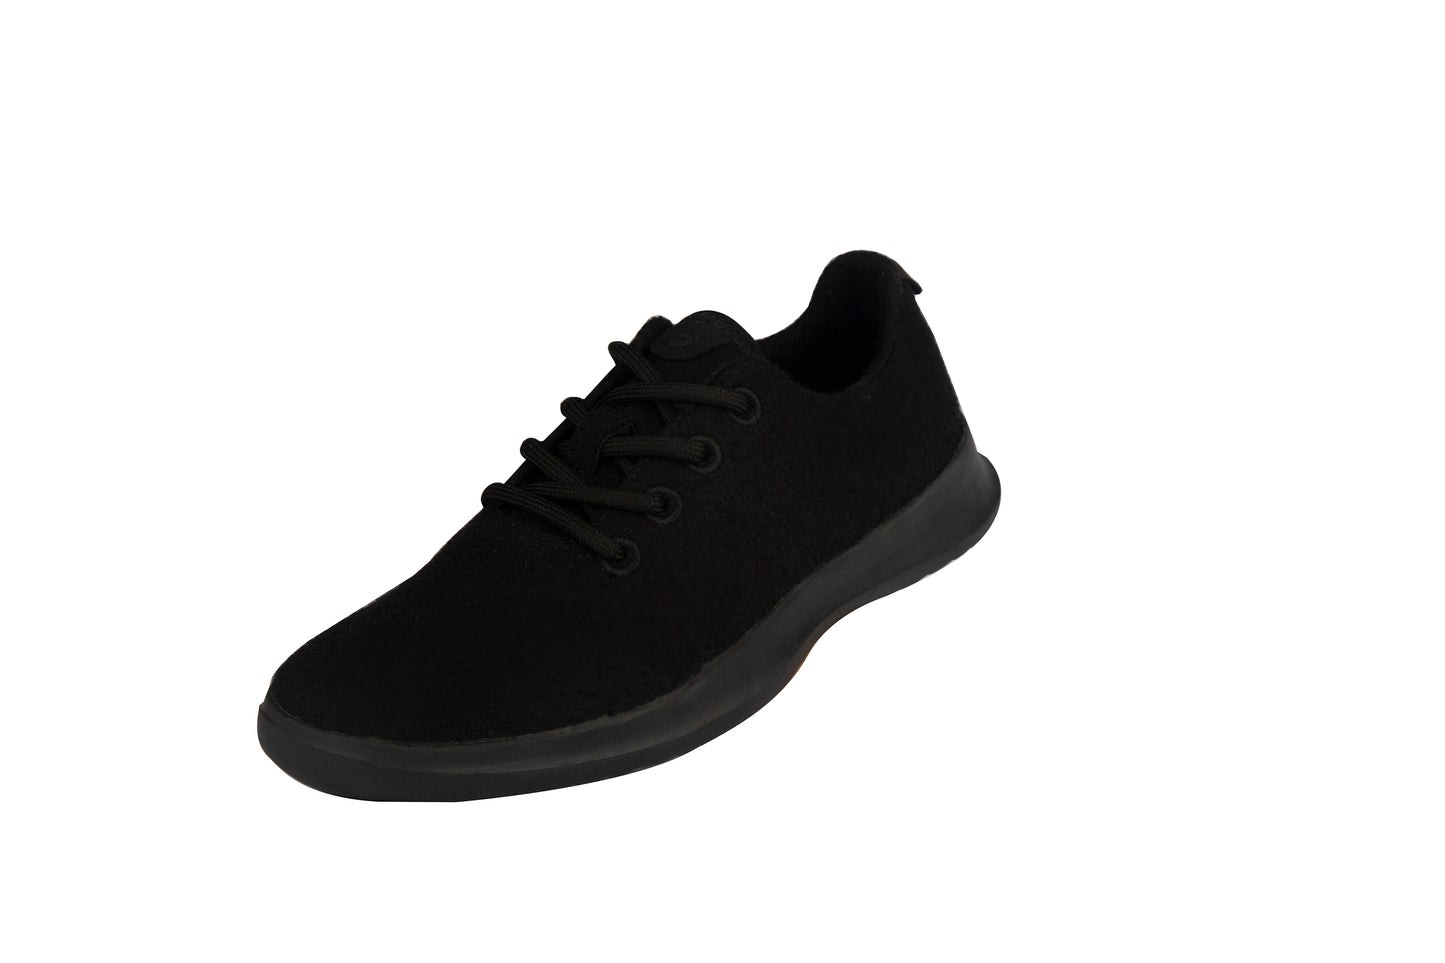 Lace-Up Cashmere Graphene Sole Running Shoes